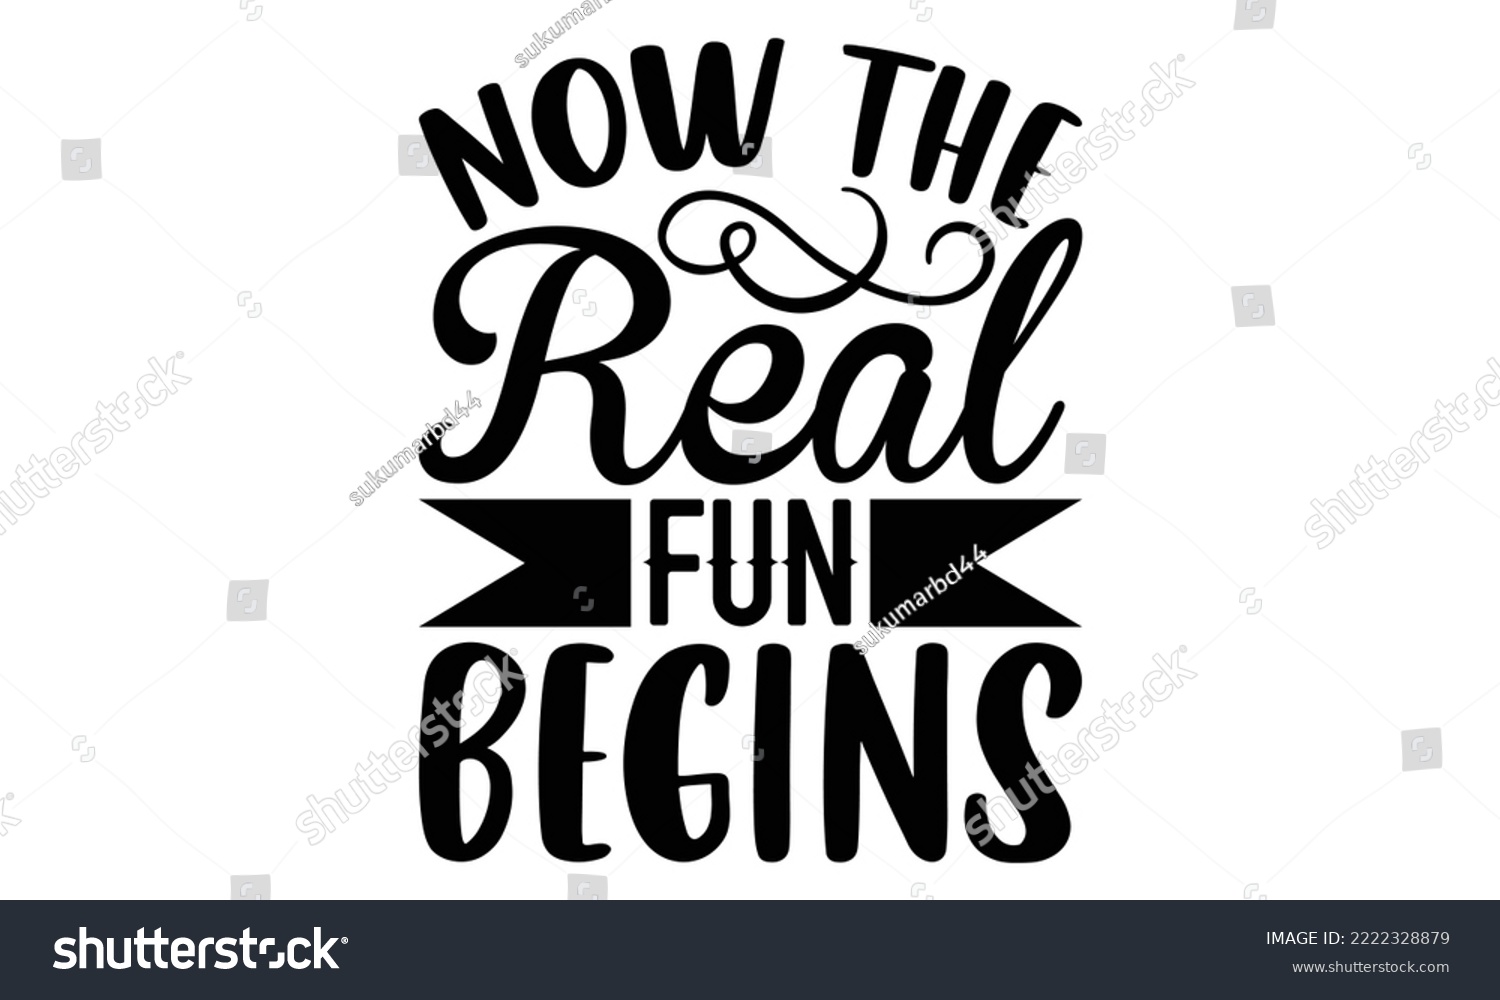 SVG of Now The Real Fun Begins - Retirement t-shirt design, Hand drawn lettering phrase, Calligraphy graphic design, eps, svg Files for Cutting svg